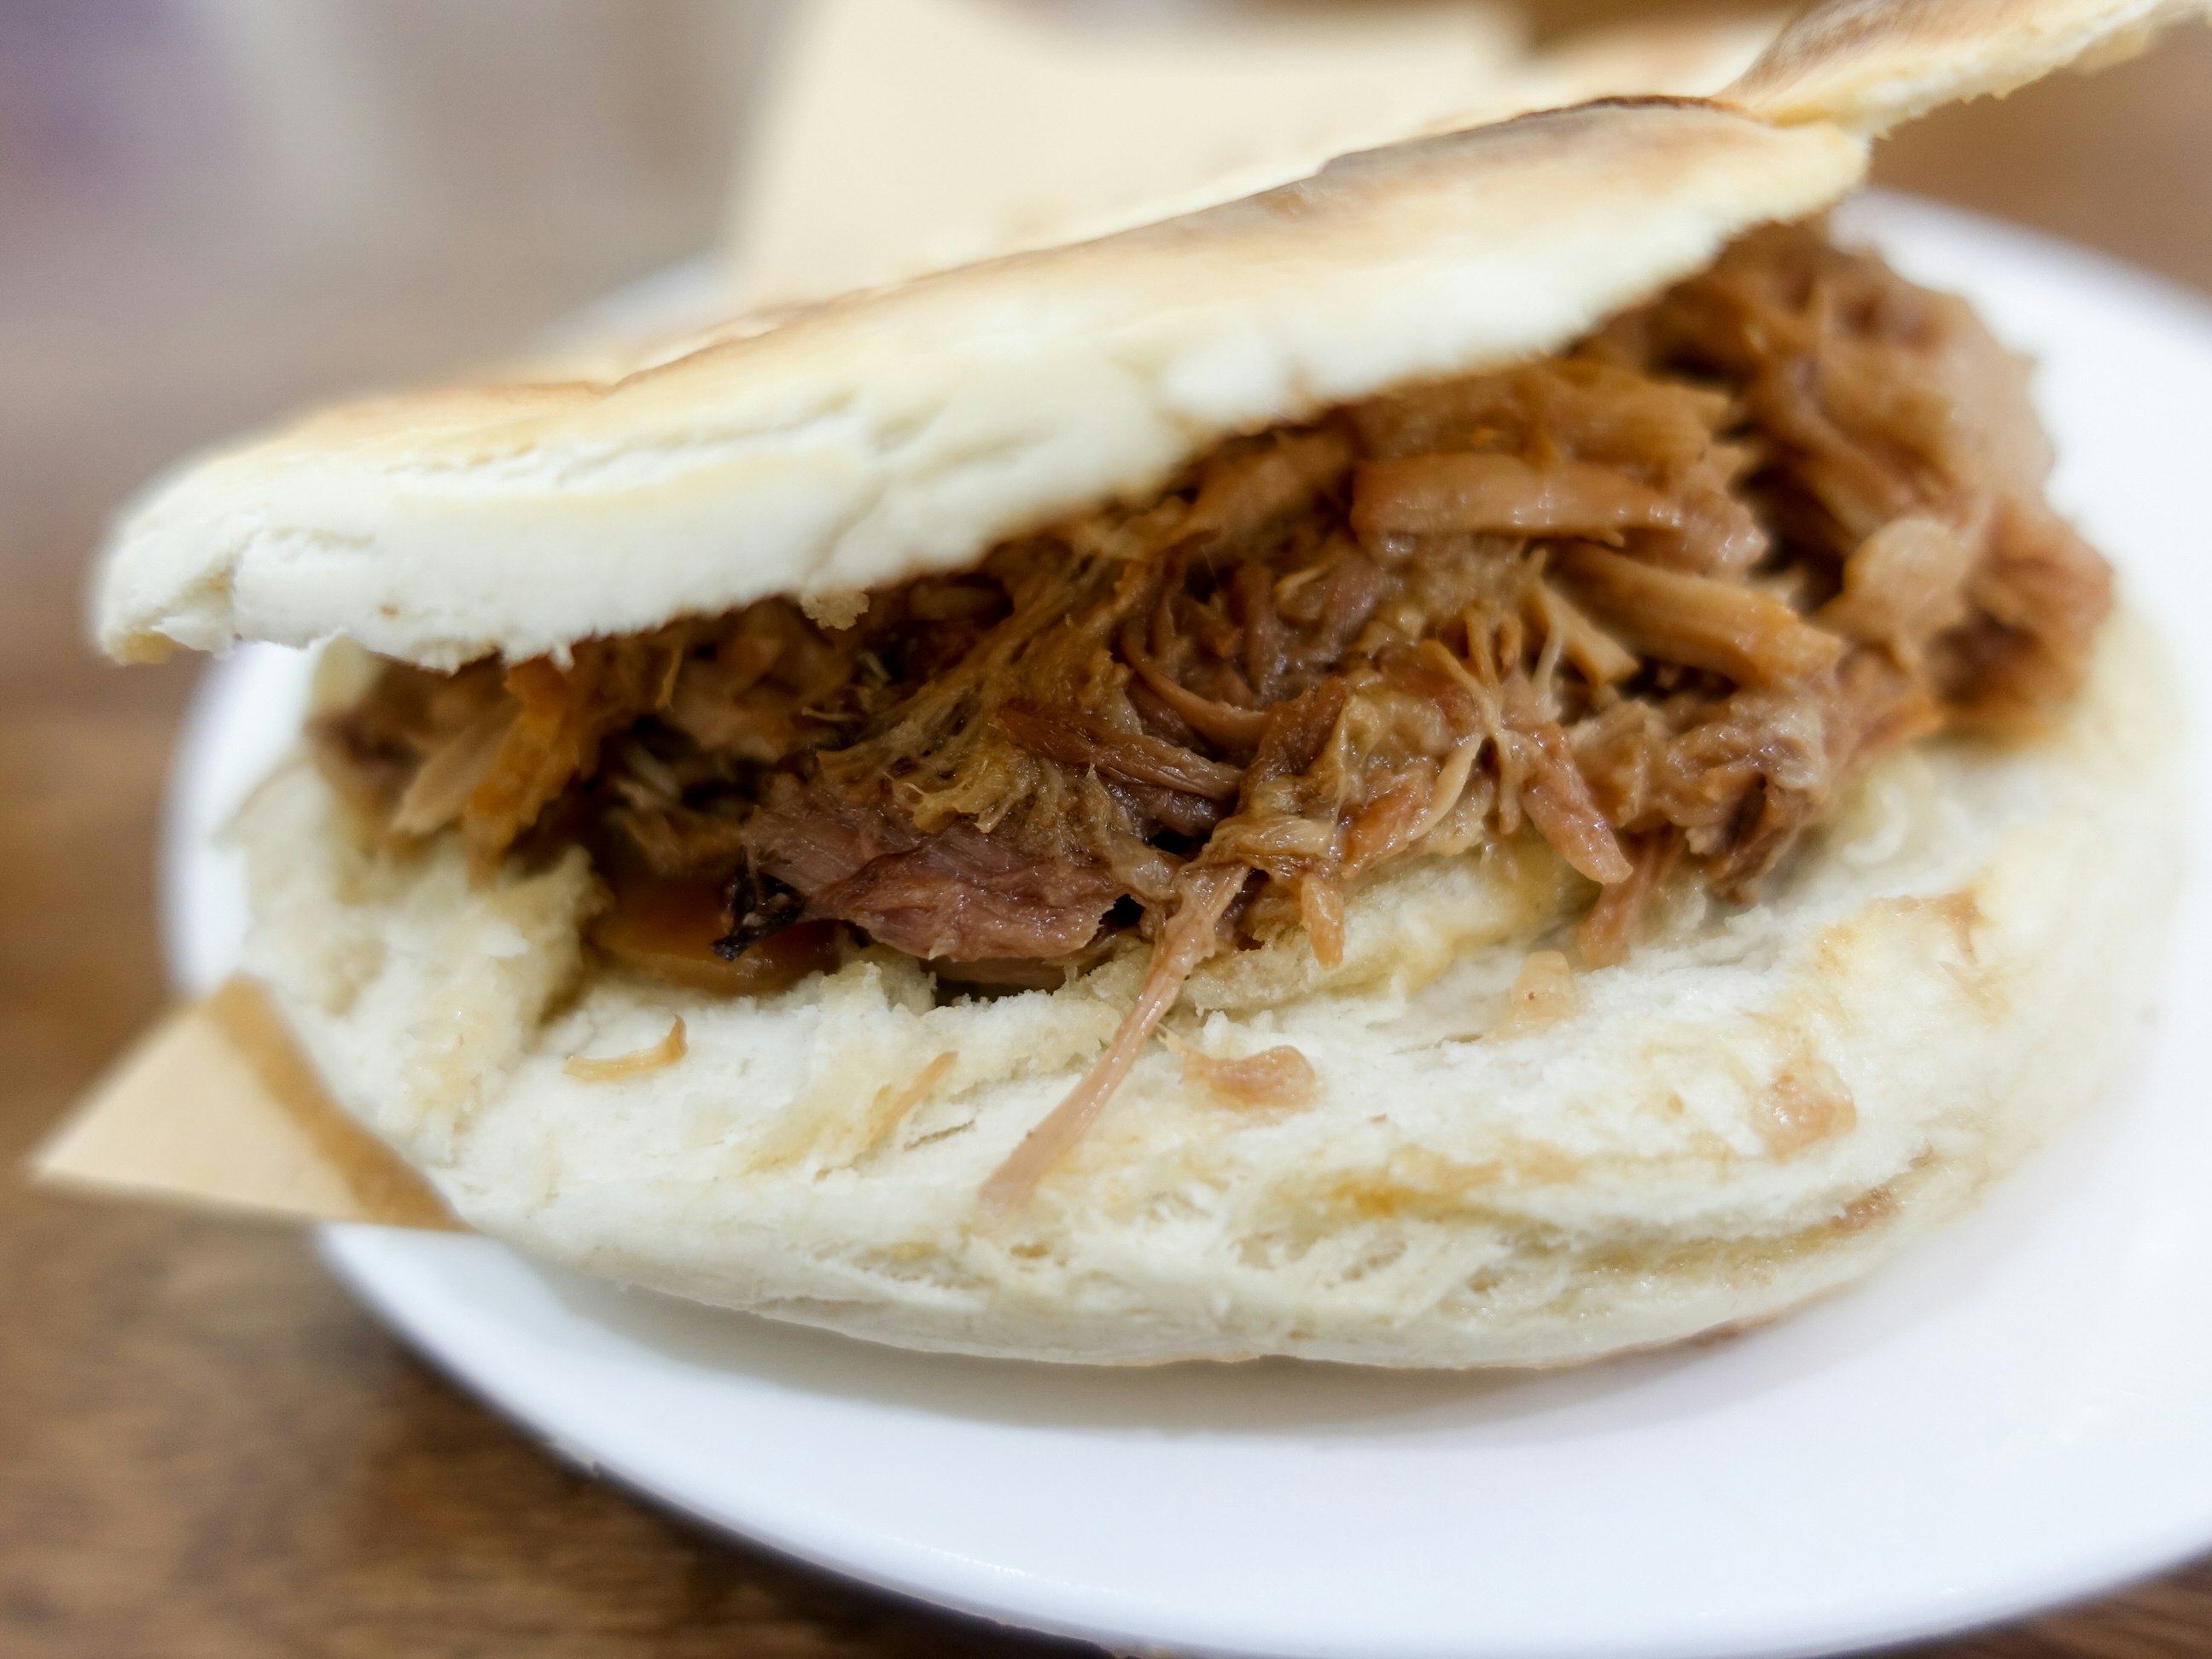 Juicy shredded beef is stuffed into an open bap. The sandwich is sitting on a white plate. 